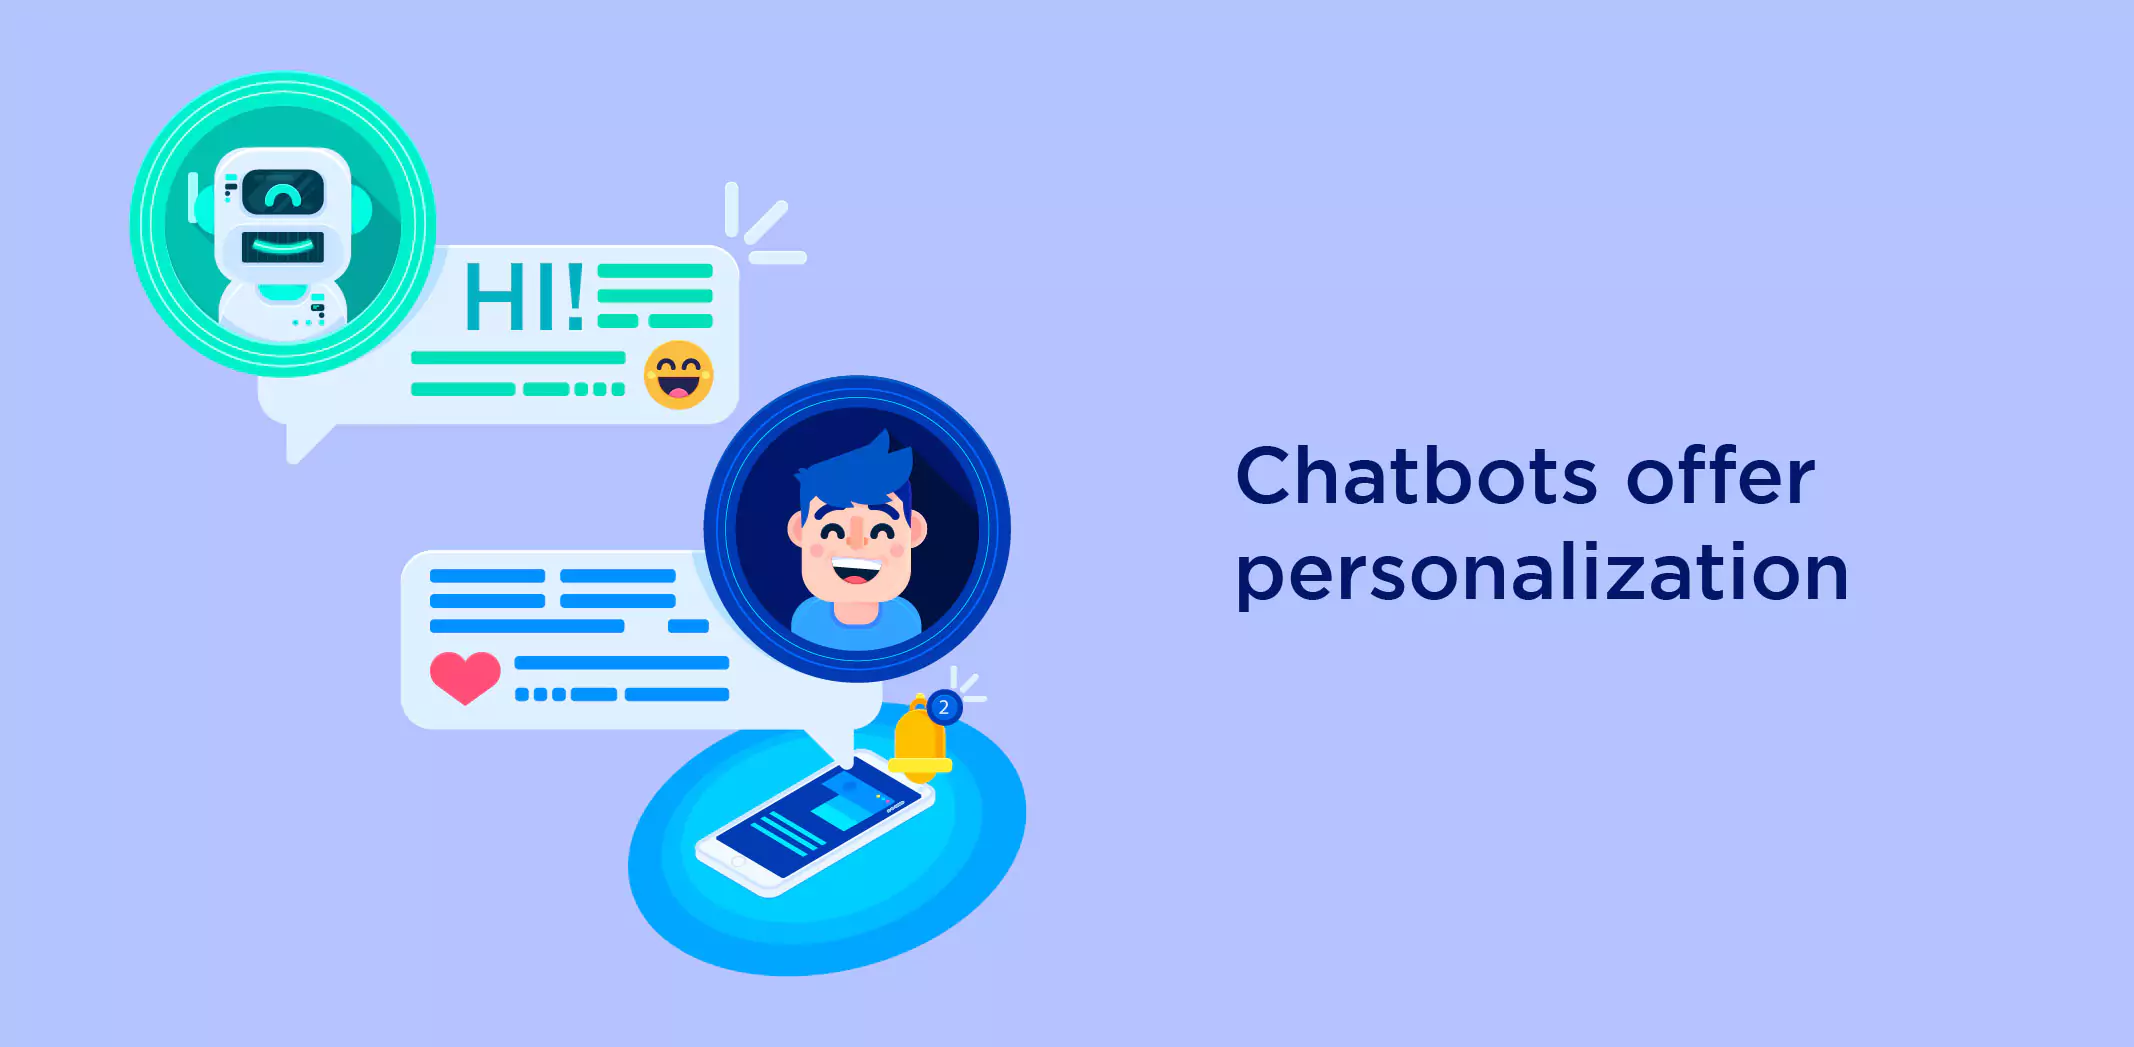  Chatbots offer personalization